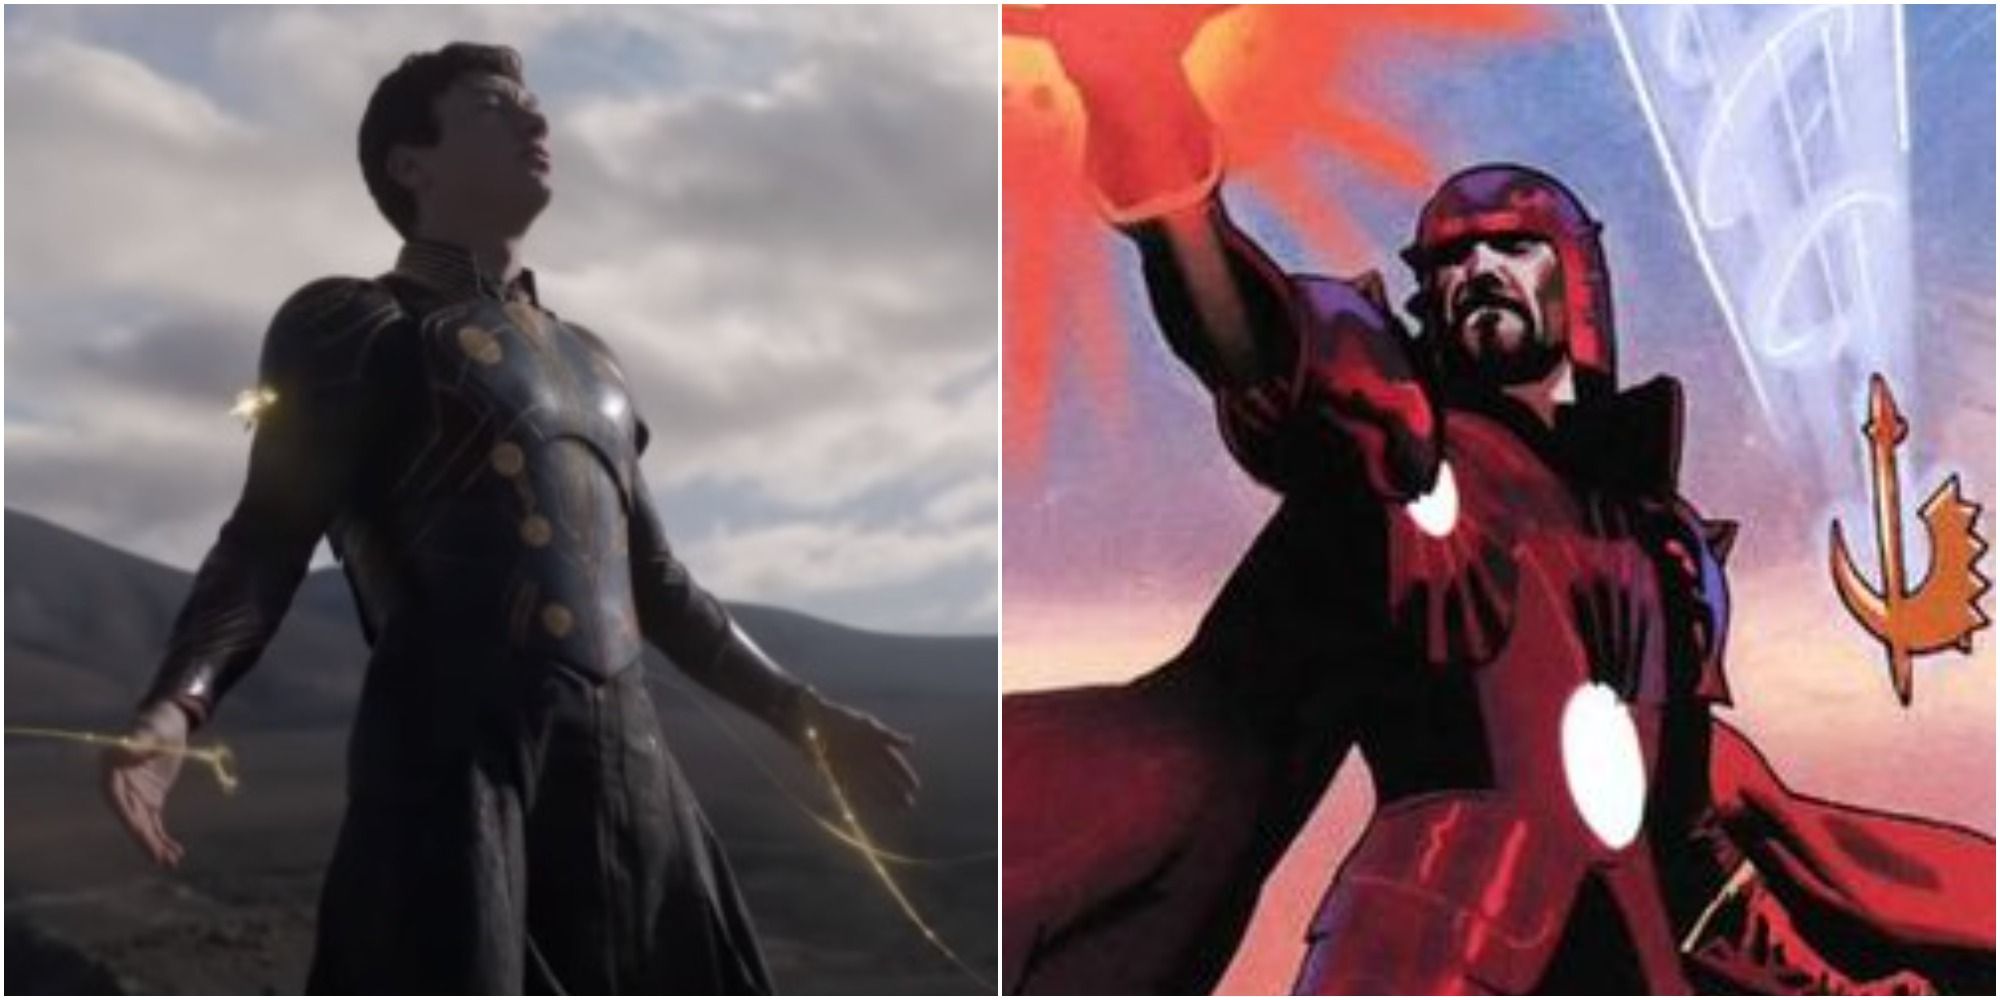 Druig In The Eternals Movie And In Marvel Comics